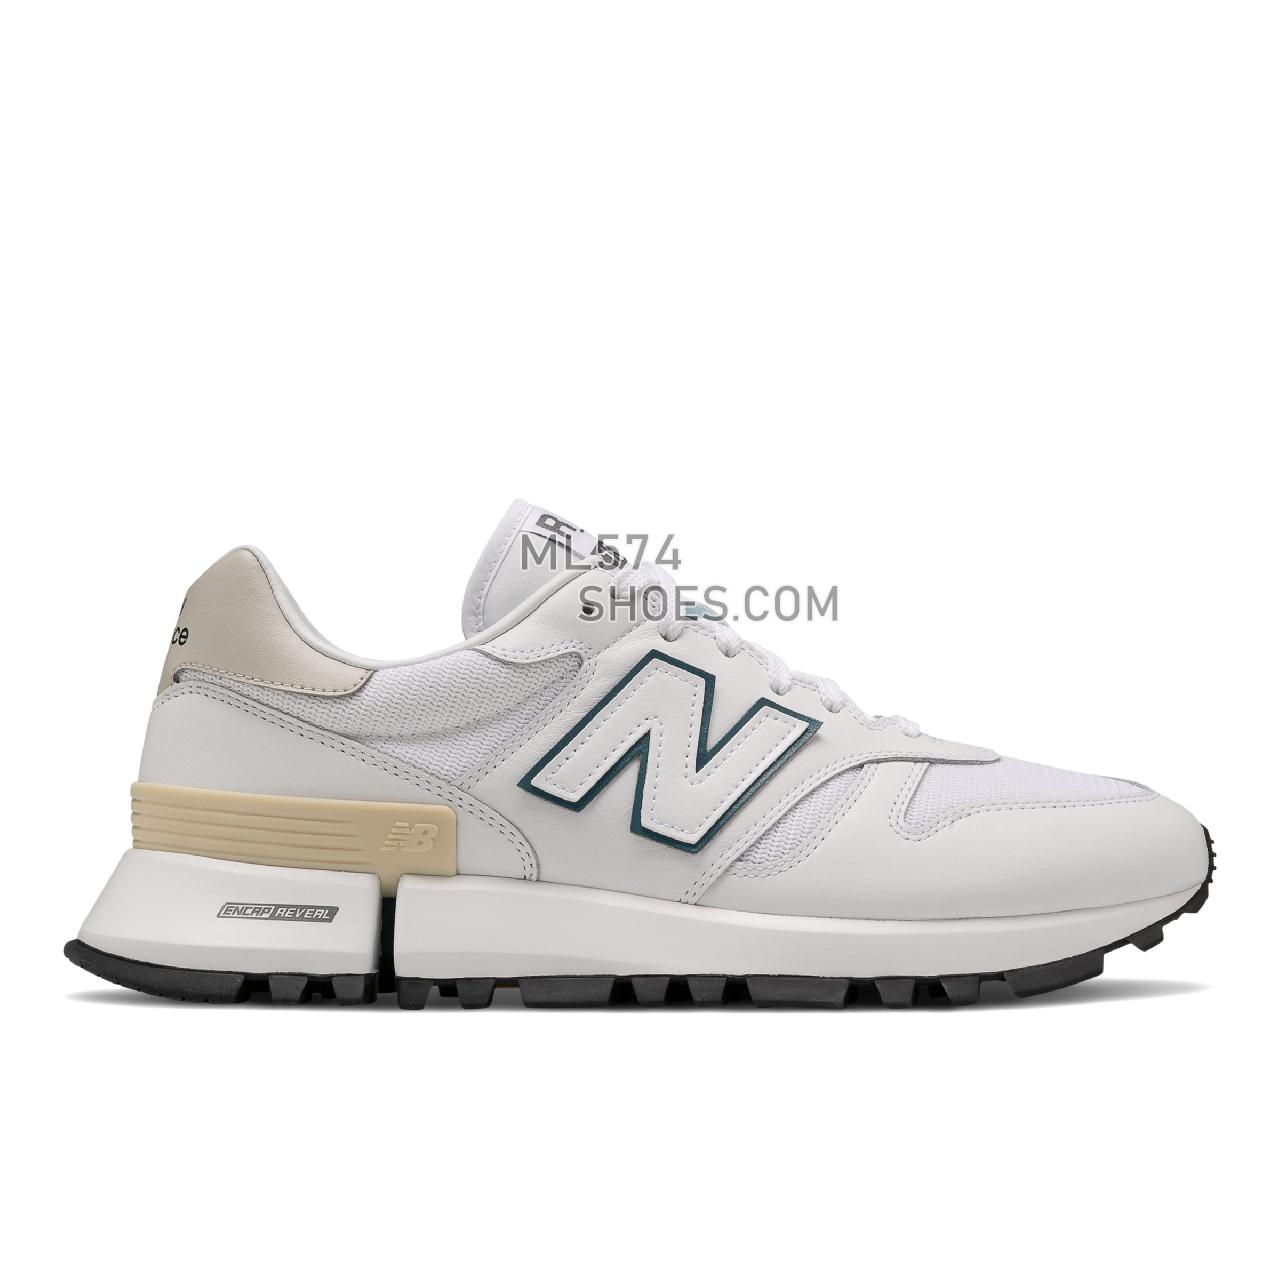 New Balance MS1300V1 - Men's Sport Style Sneakers - White with Mallard Blue - MS1300WG